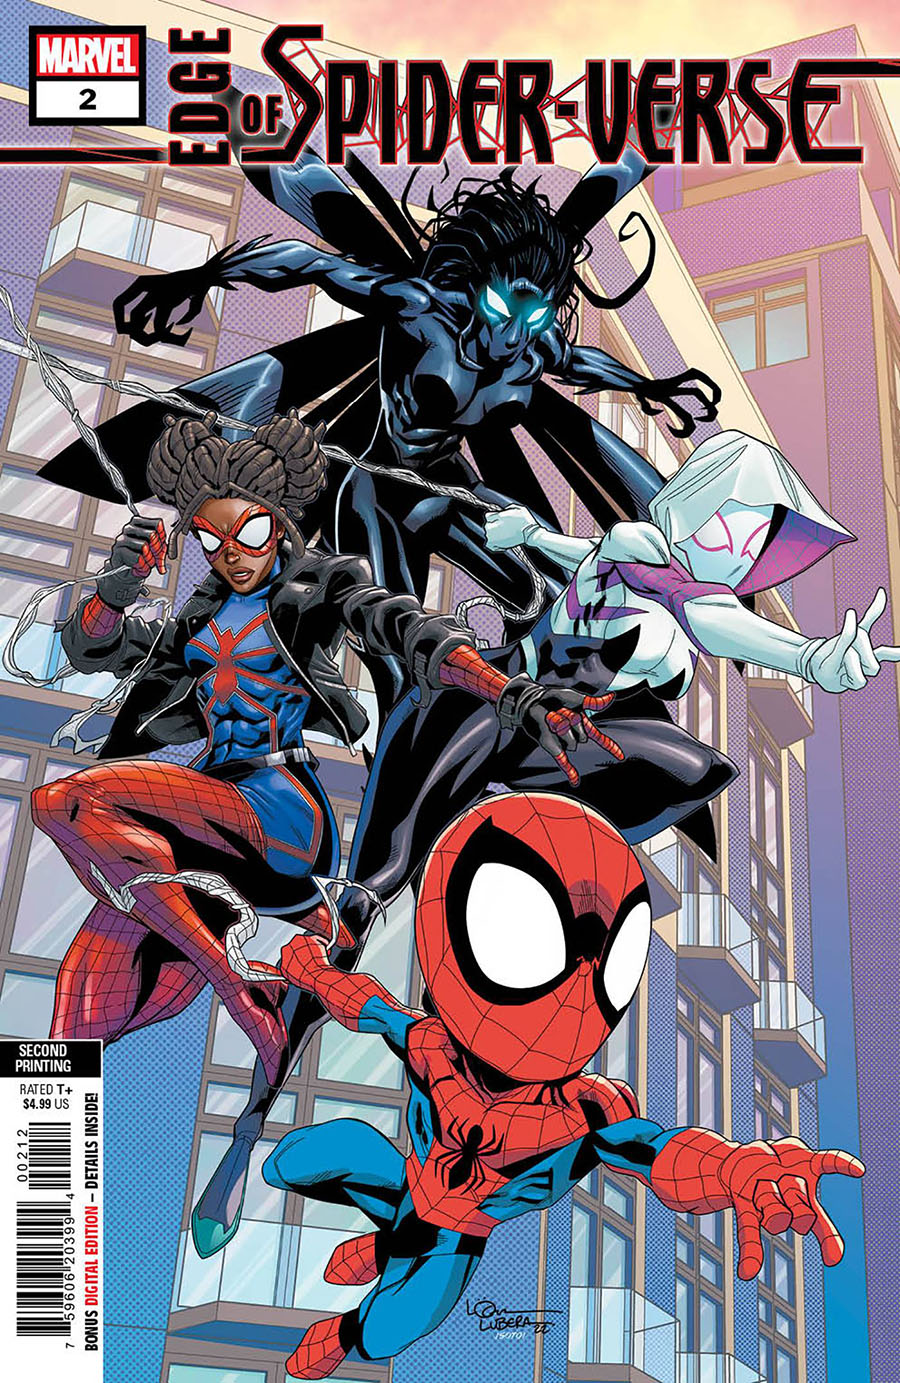 Edge Of Spider-Verse Vol 2 #2 Cover D 2nd Ptg Logan Lubera Variant Cover